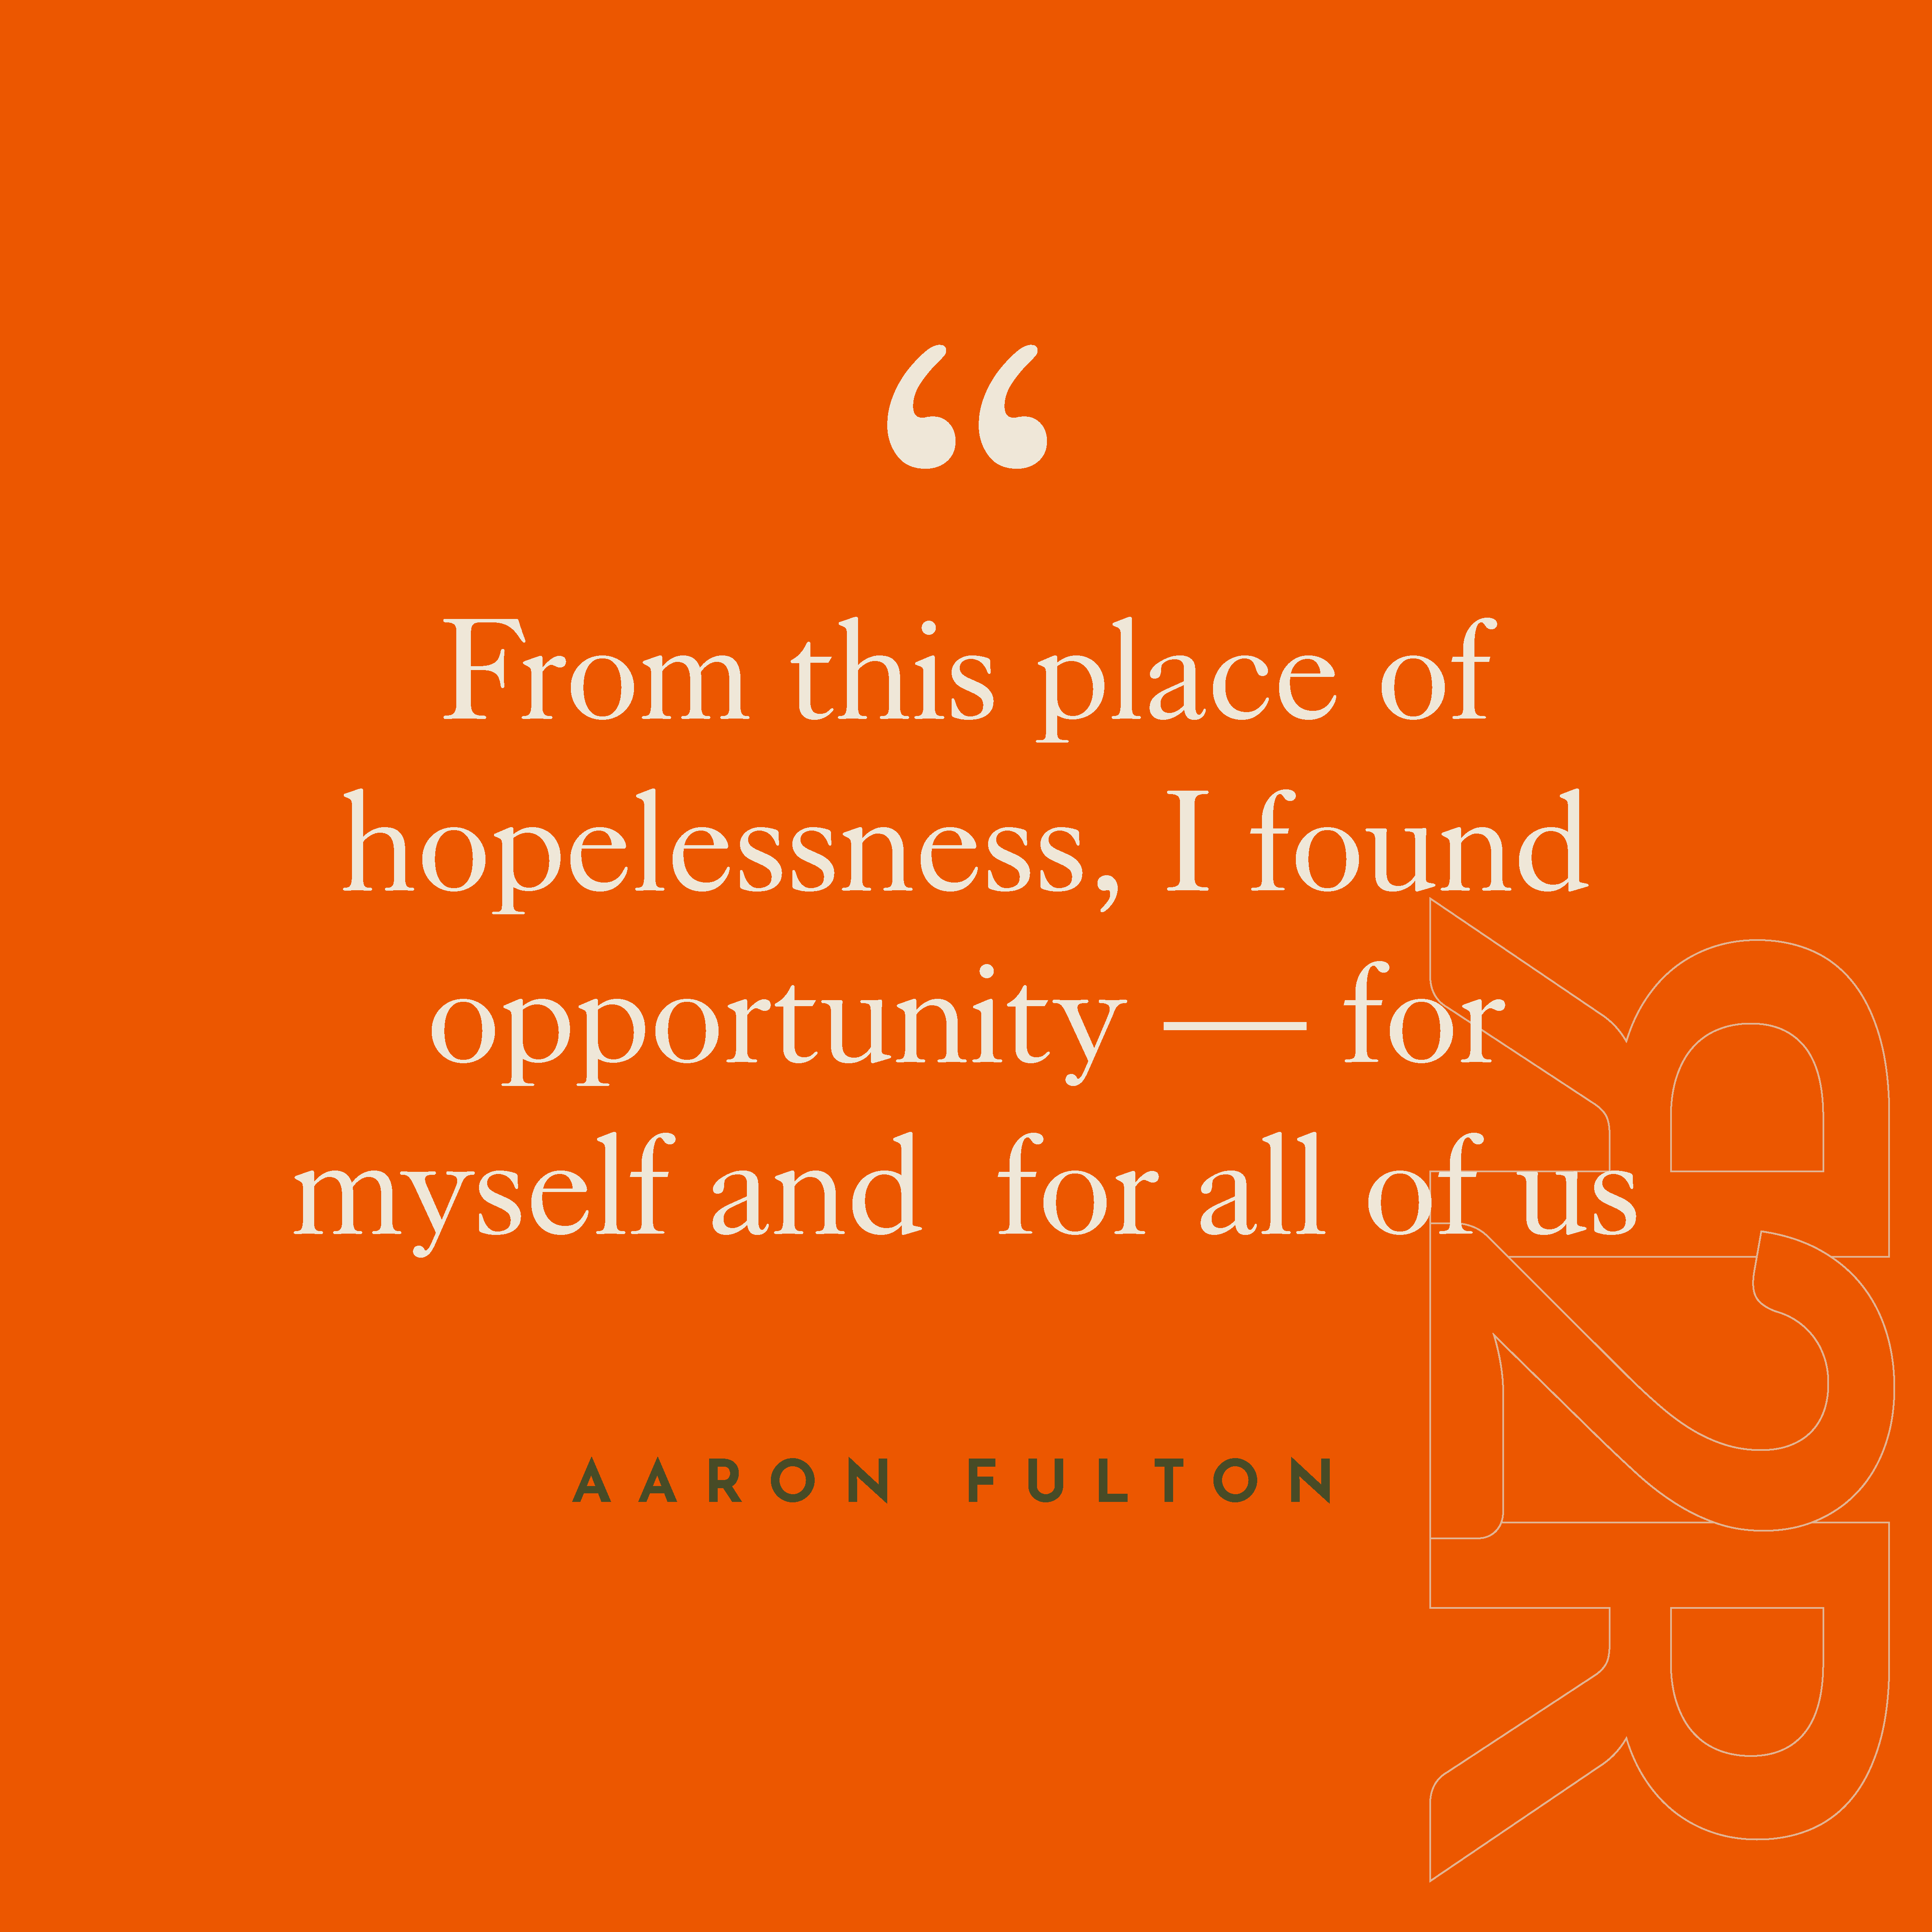 A Day in the Life: Aaron Fulton